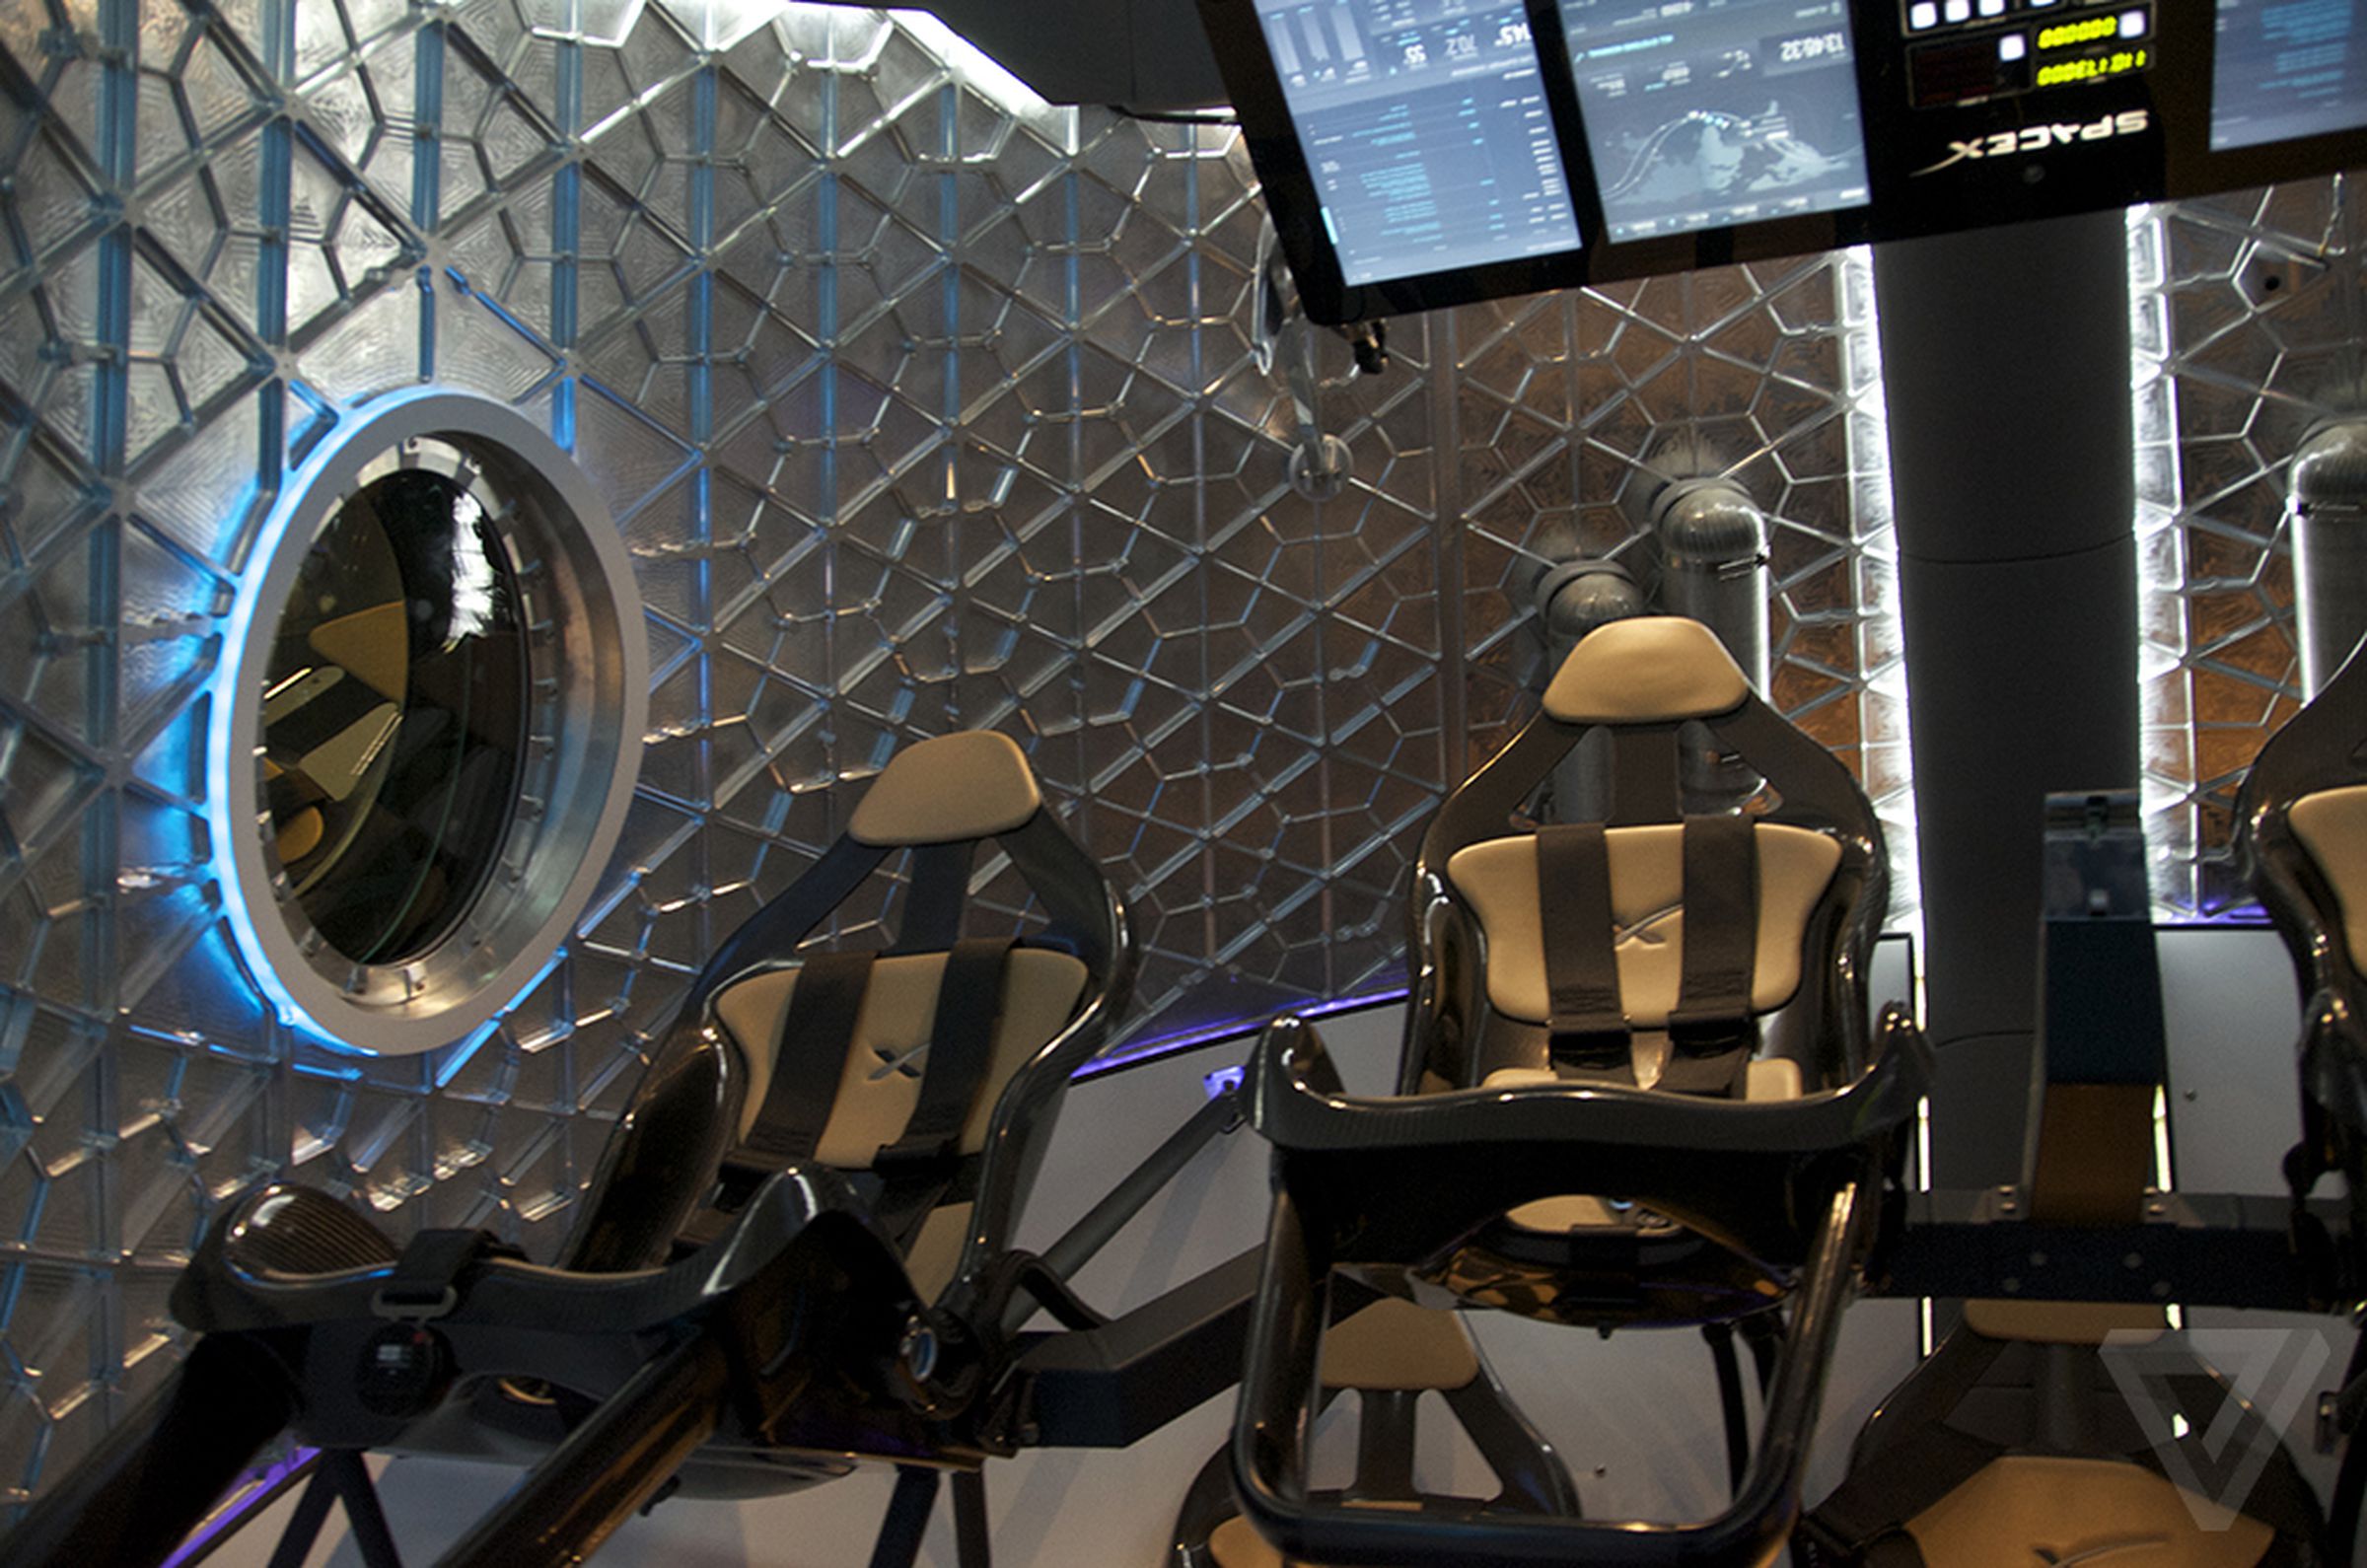 SpaceX Dragon V2 unveiling photos